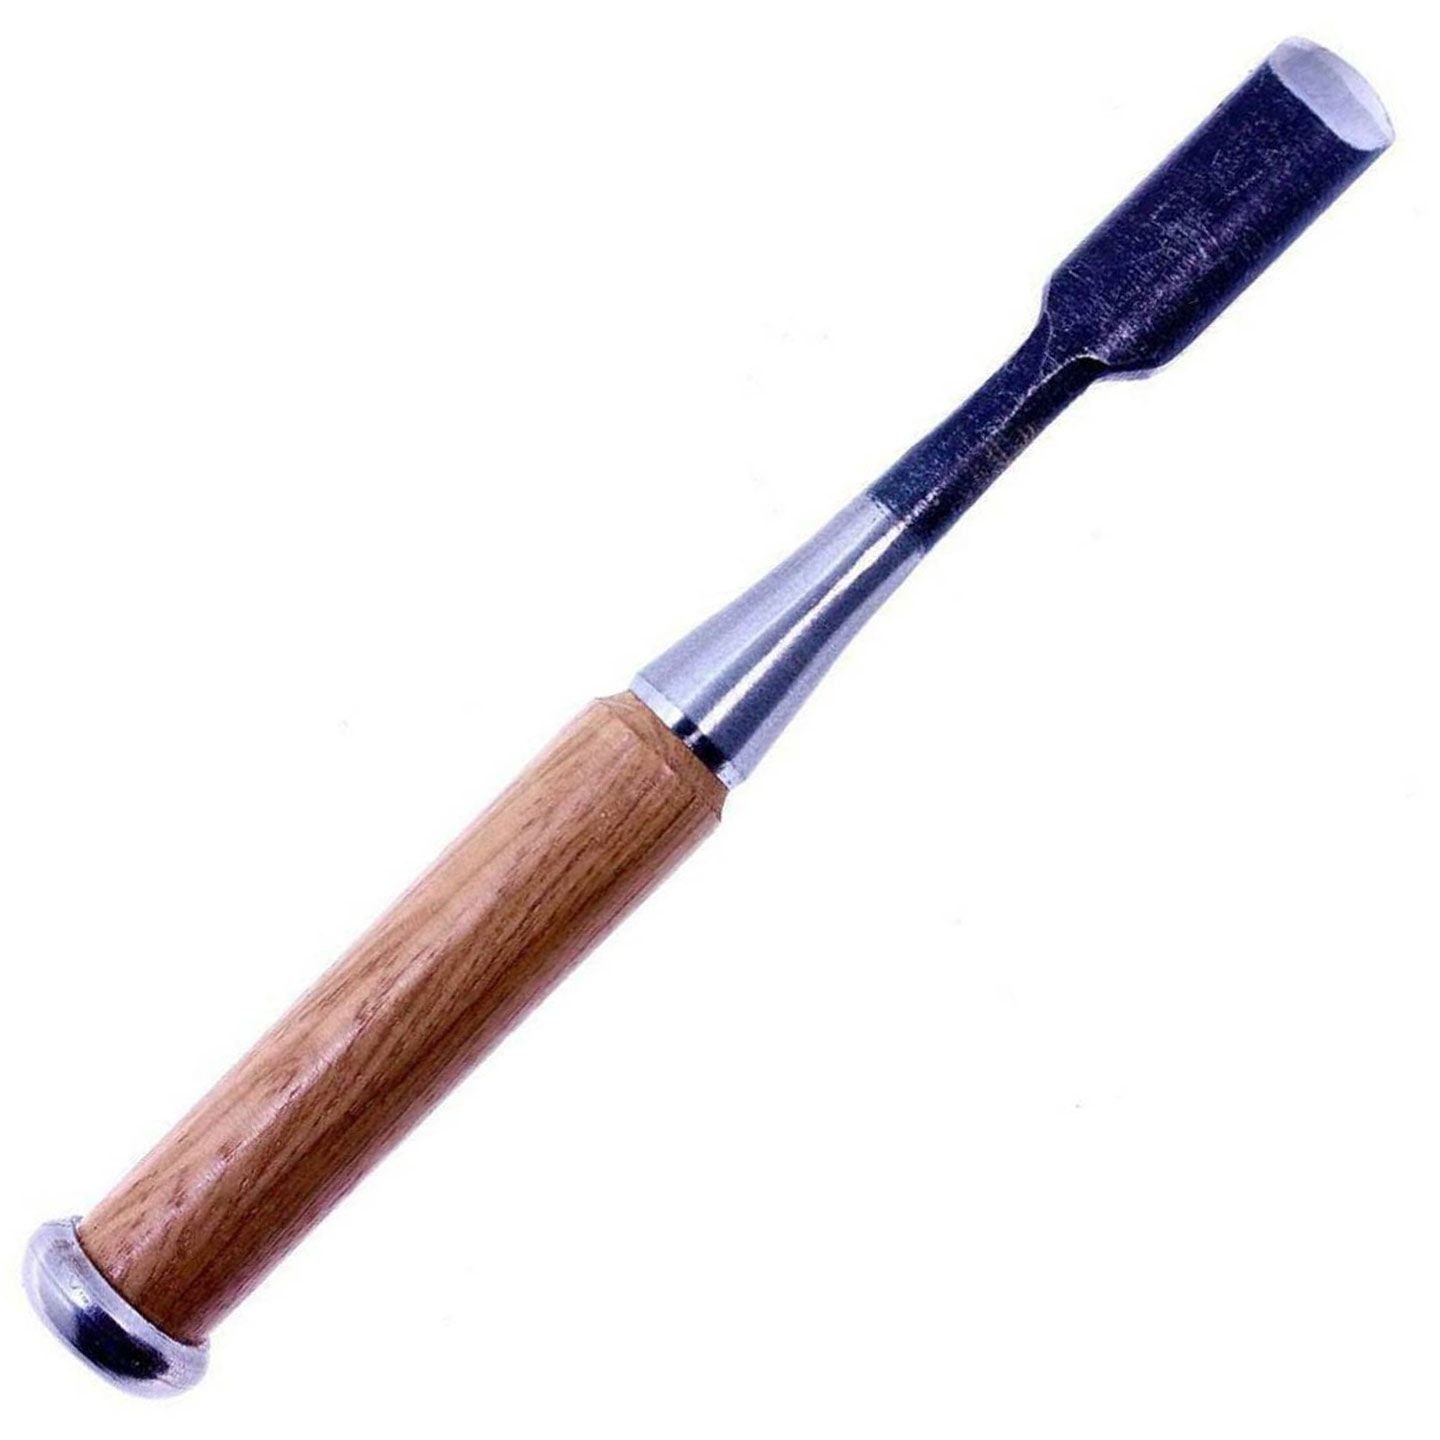 Mikisyo Power Grip Japanese PMC & Wood Carving Tool 6mm Woodcarving U  Gouge, with Wooden Handle, to Carve Channels in Woodworking